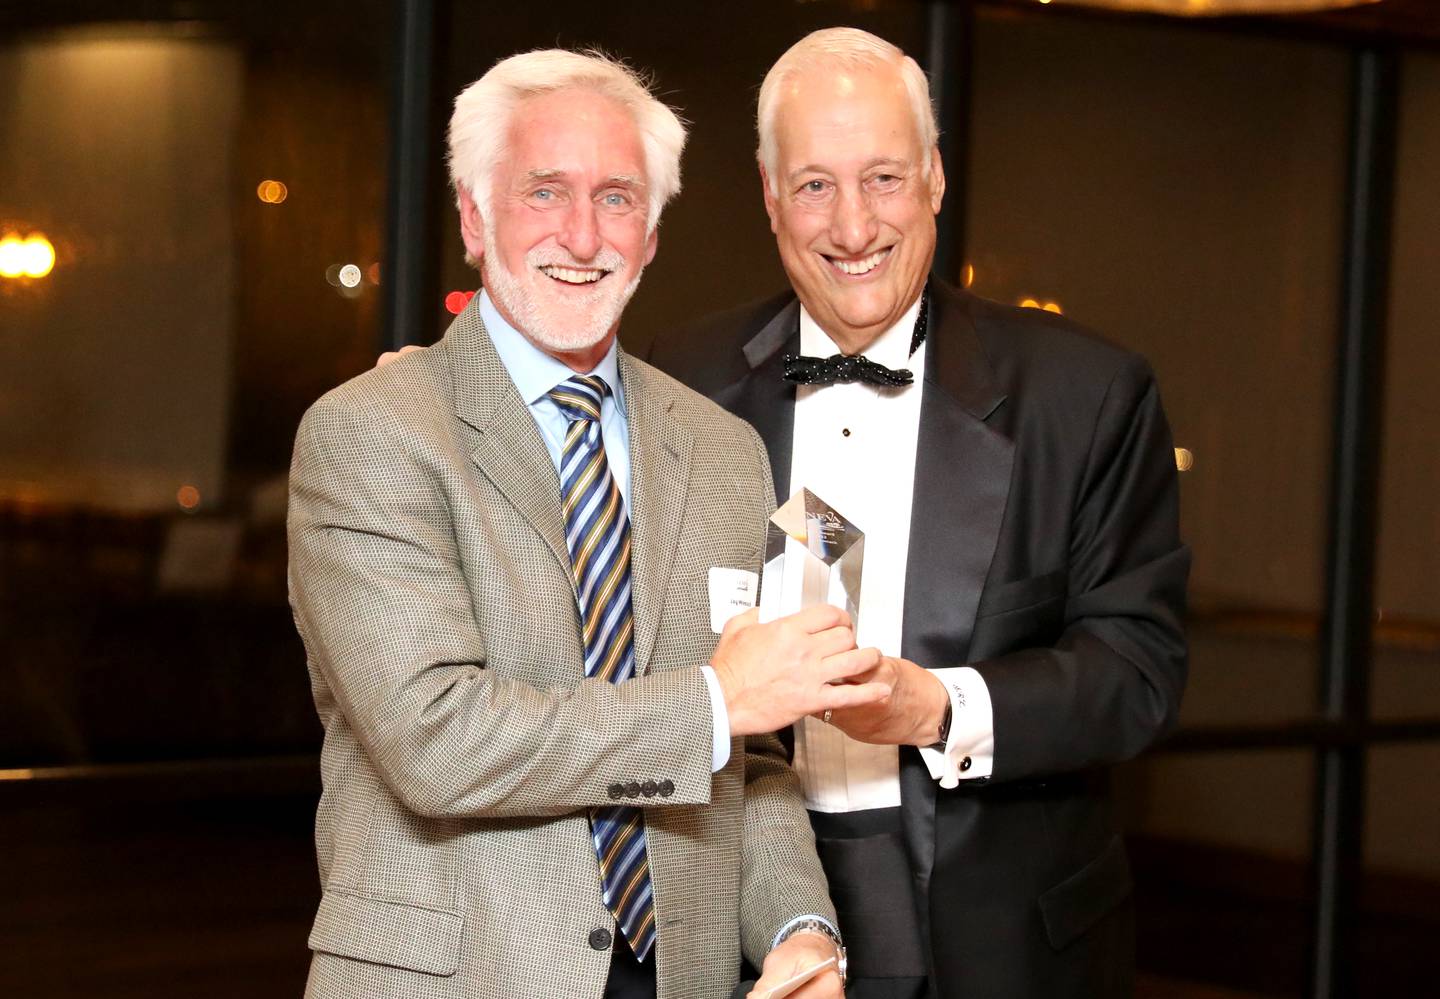 Jay Womack is presented with the 2022 Wood Award by Scott Lebin, chairman of the Geneva Chamber of Commerce Board of Directors during the chamber’s annual dinner and awards at Riverside Receptions in Geneva on Wednesday, Nov. 16, 2022.